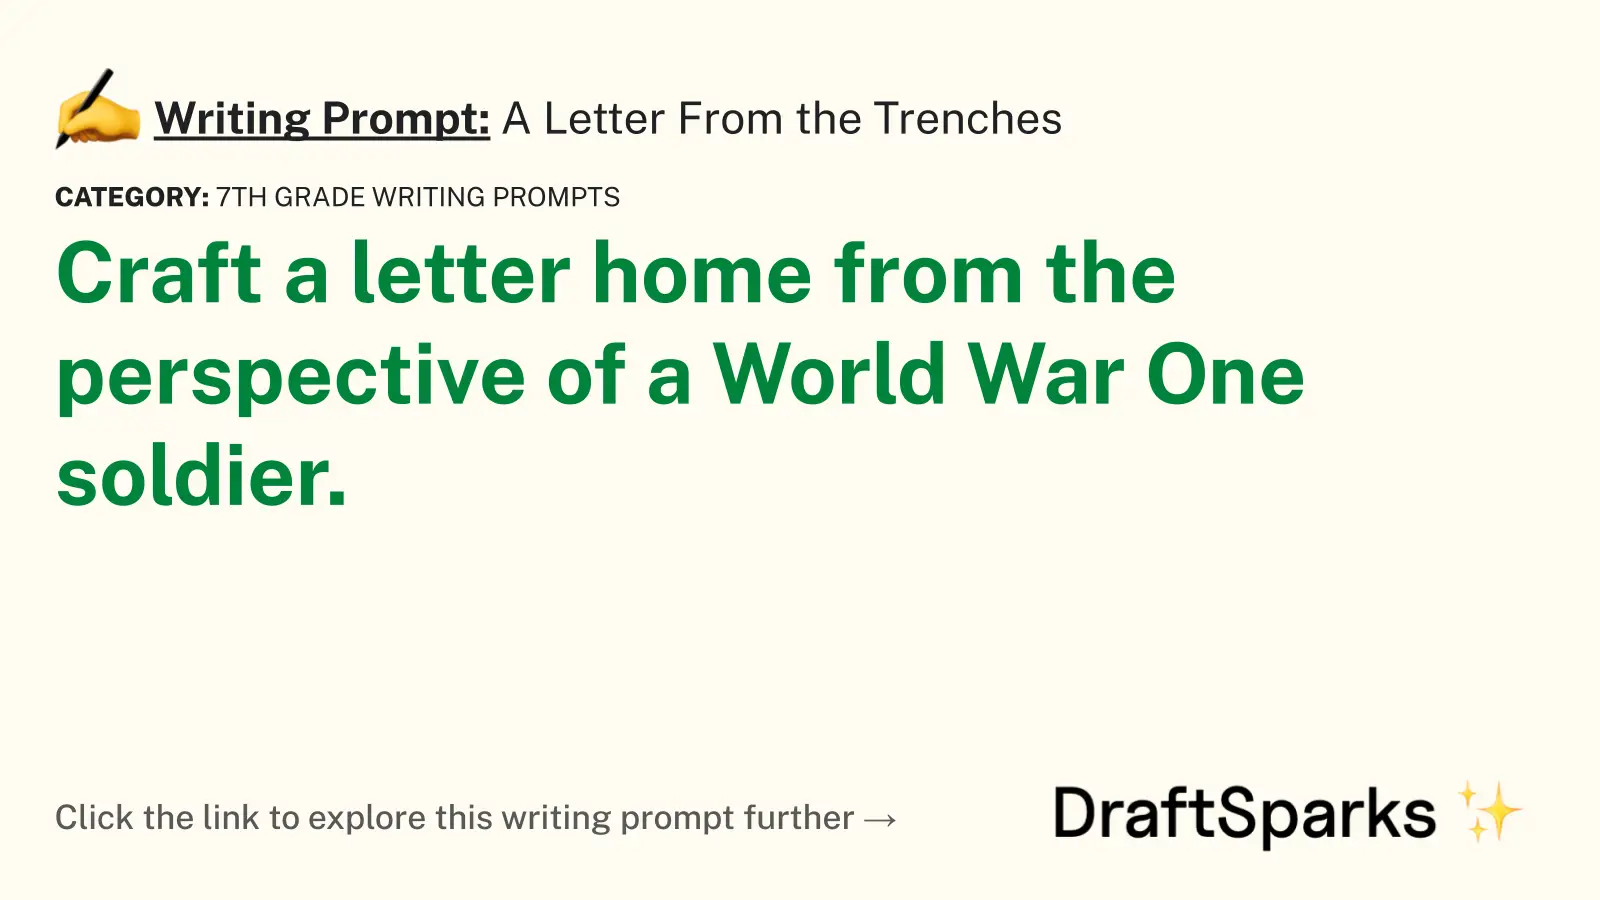 A Letter From the Trenches